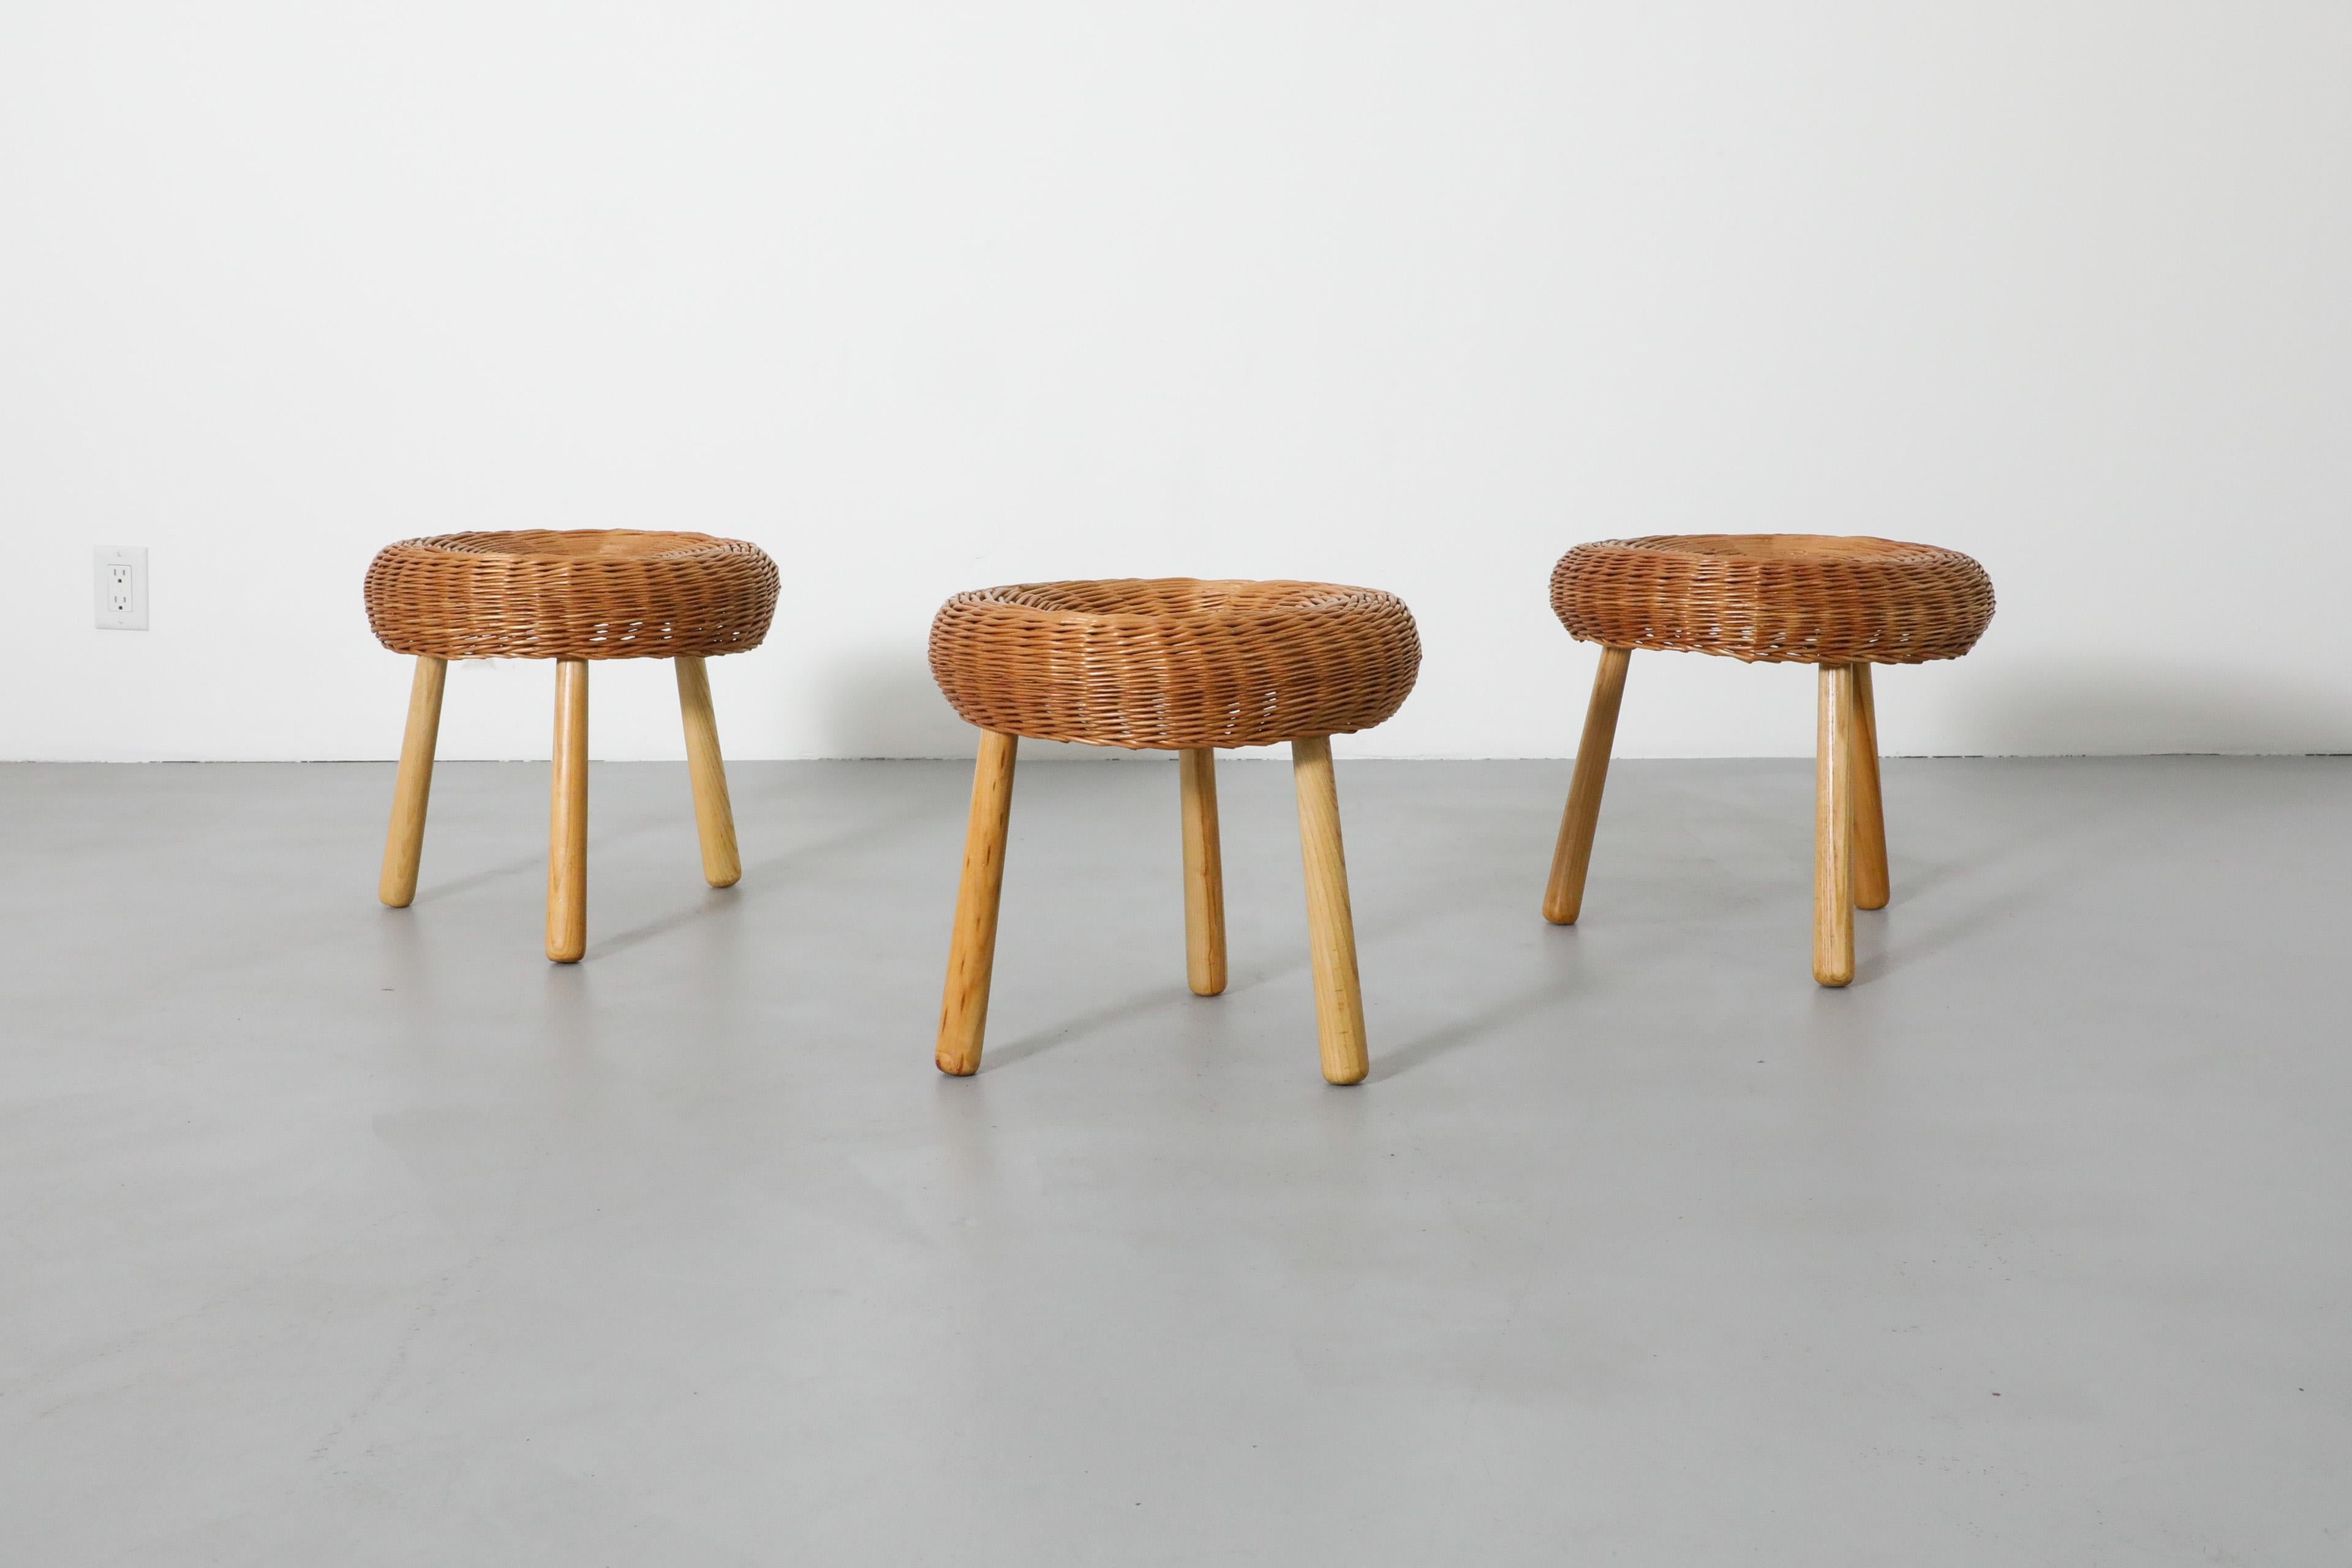 These beautiful Mid-Century stools are attributed to the American designer Tony Paul and were made in the former Yugoslavia in the 1950s, early 1960's. They have three attractively tapered legs made of llight brown wood and a round seat made of